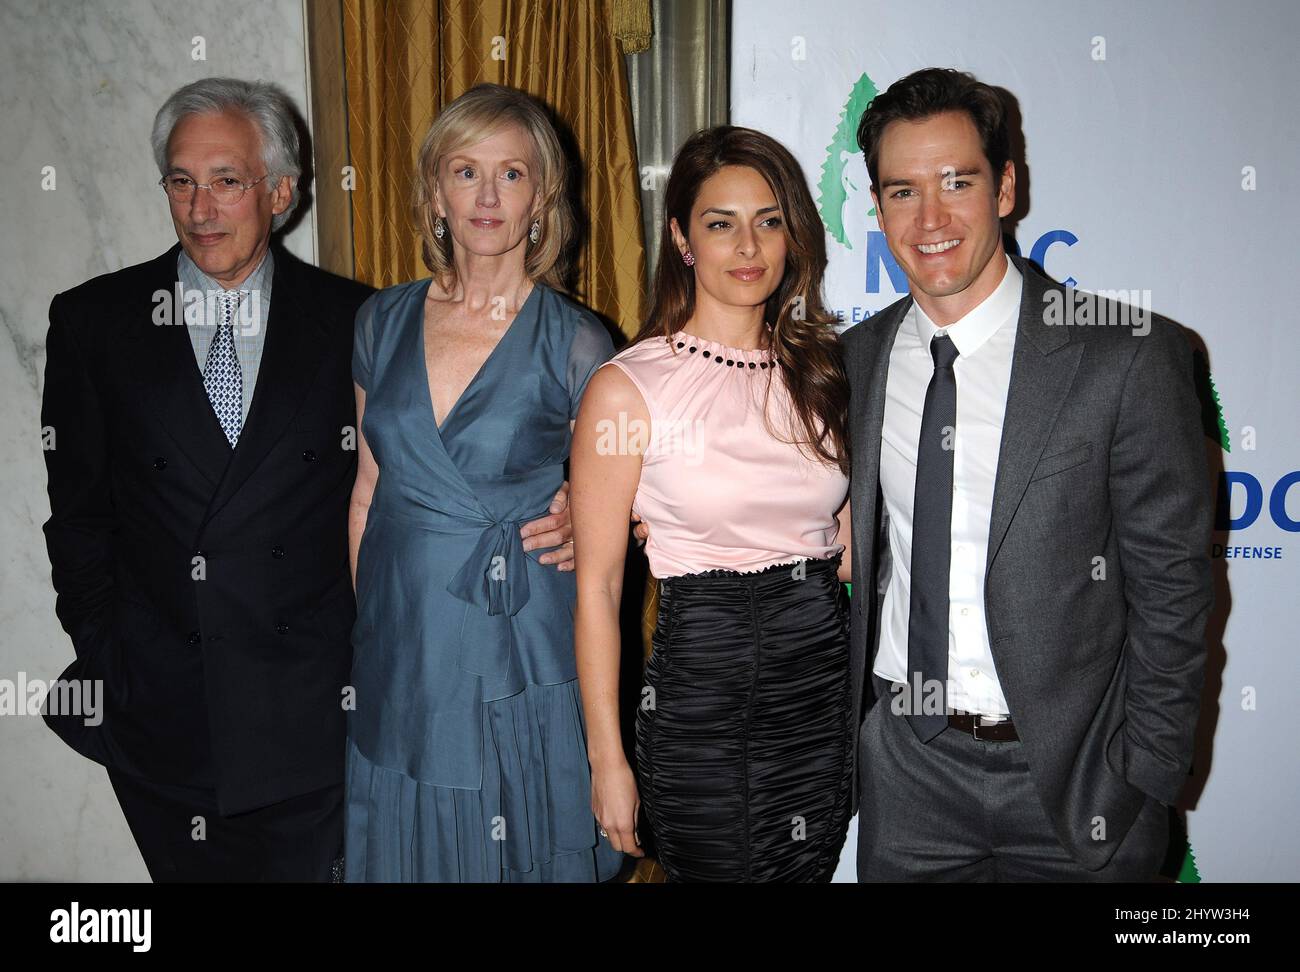 Steven Bochco, Mark-Paul Gosselaar and Lisa Ann Russell attends NRDC's 20th Anniversary at the Wilshire Hotel in Beverly Hills, CA, USA. Stock Photo